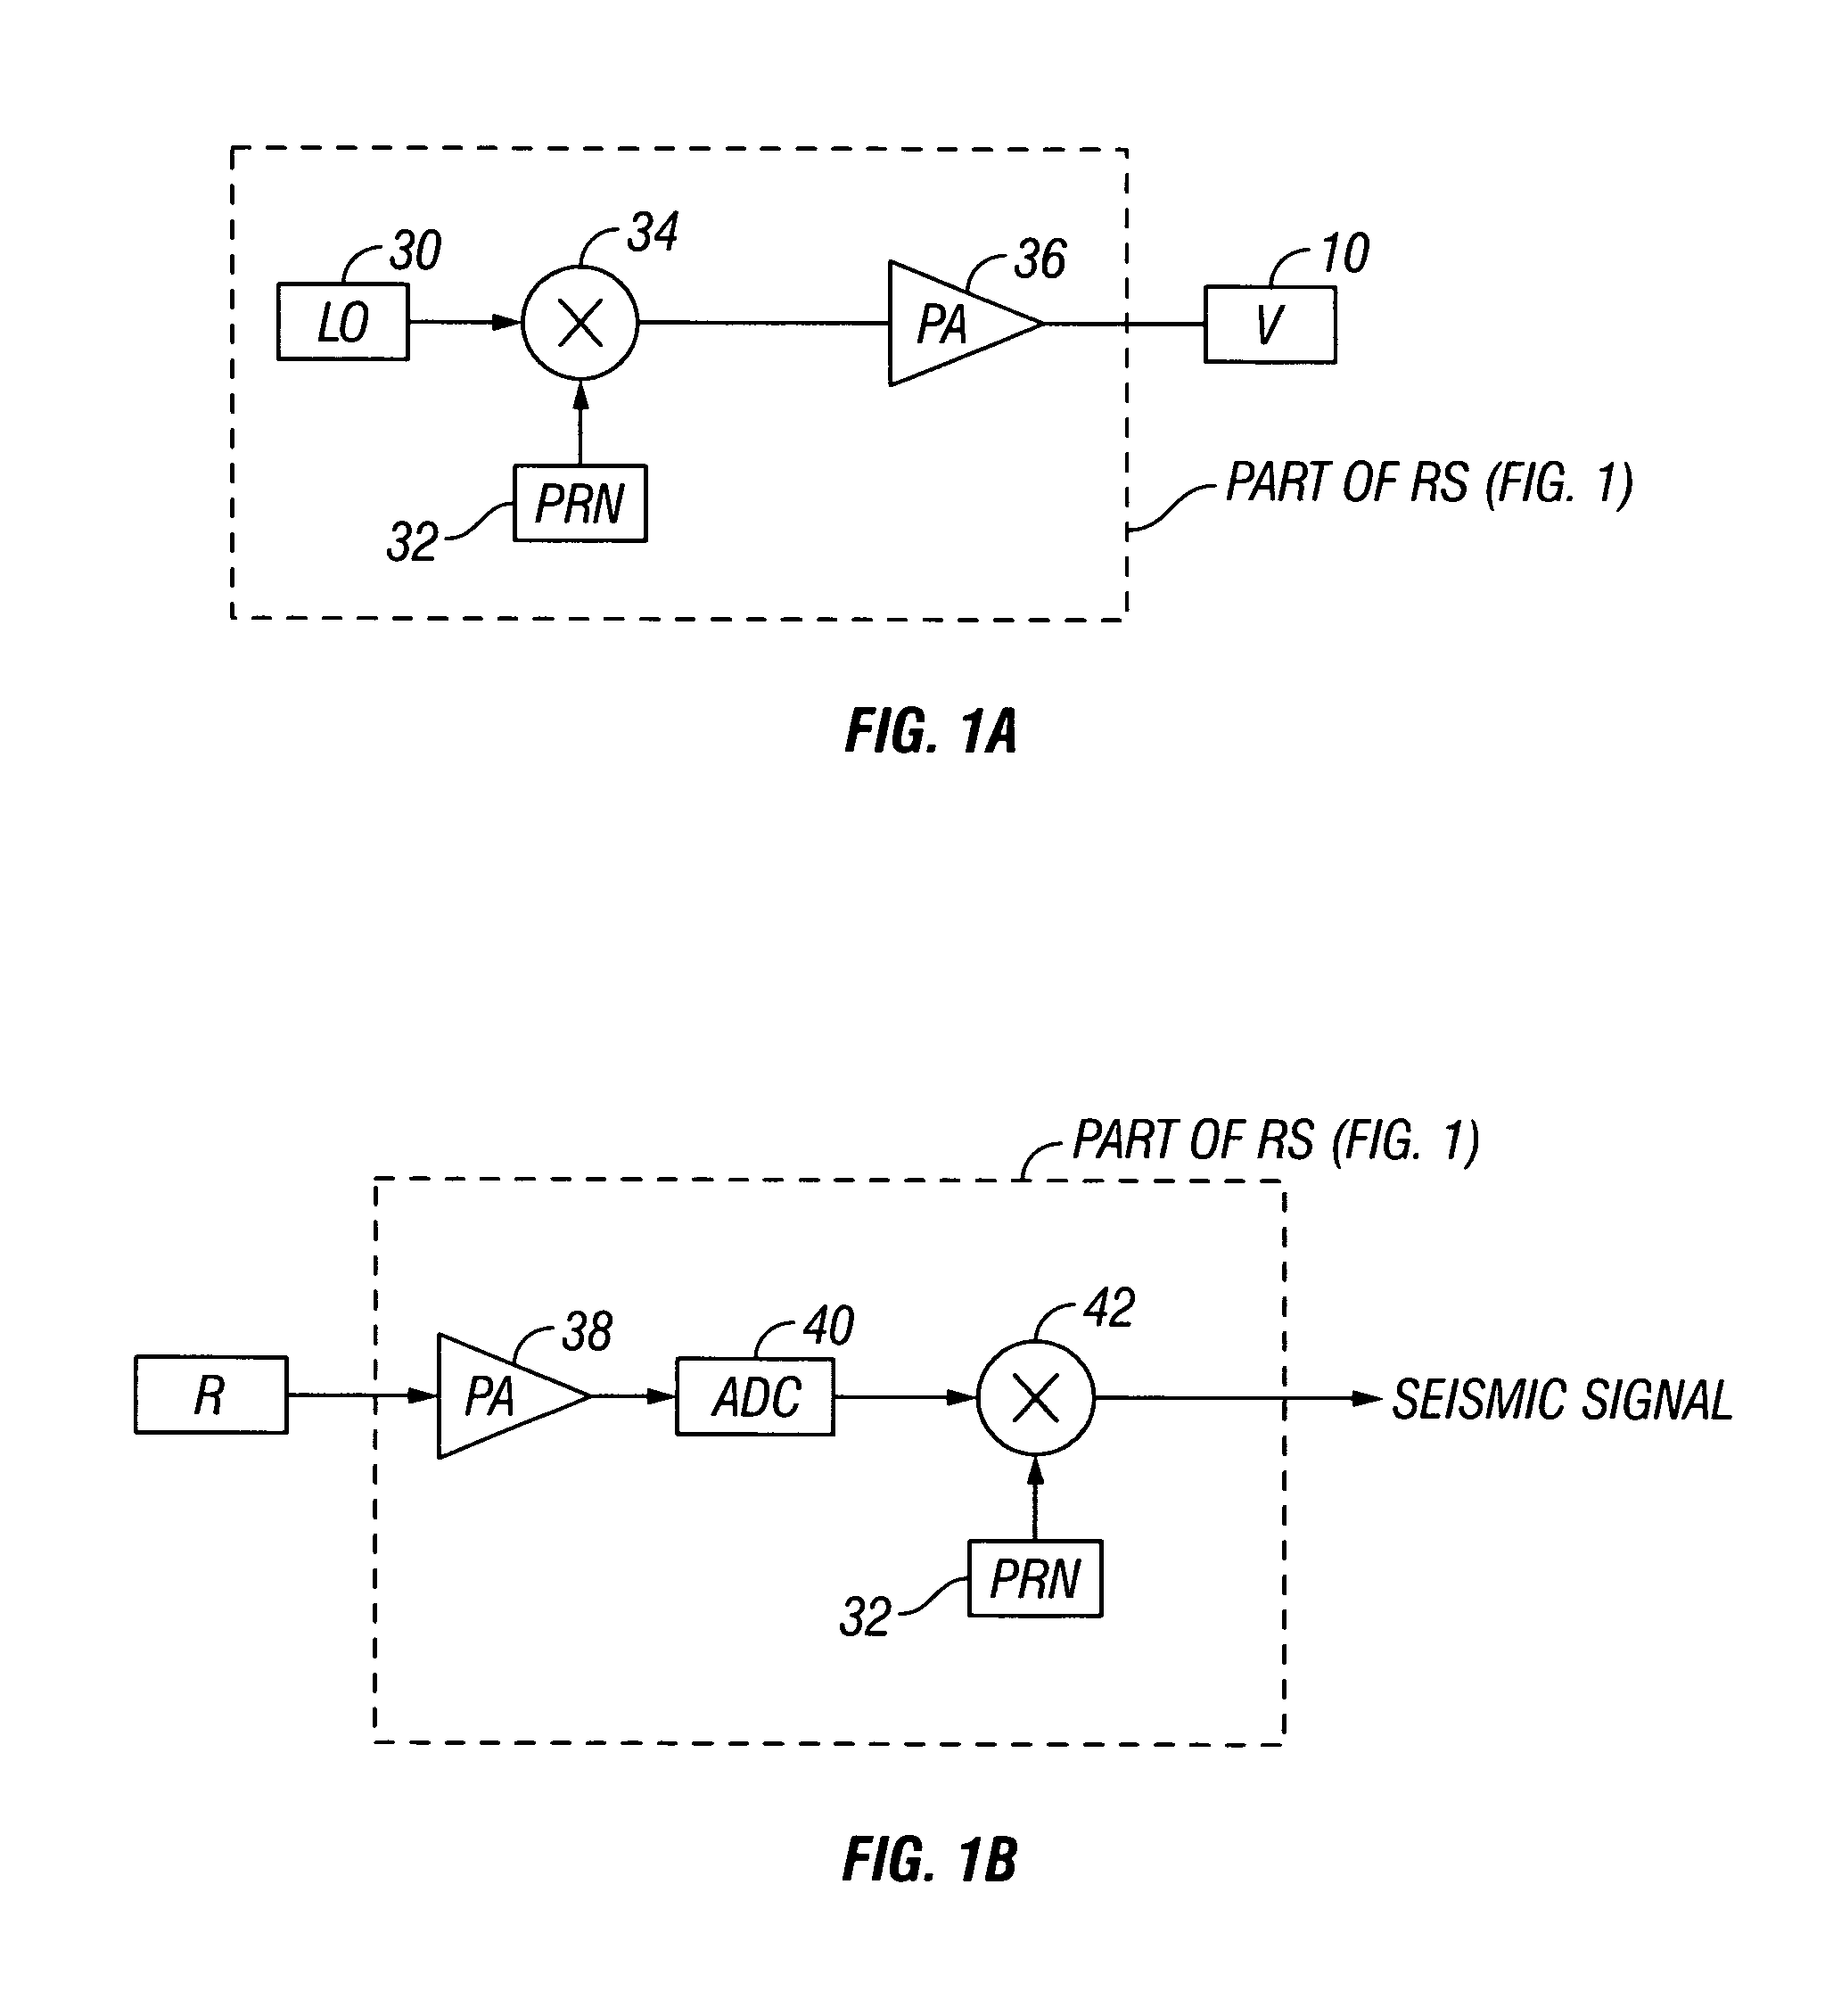 Method for generating spread spectrum driver signals for a seismic vibrator array using multiple biphase modulation operations in each driver signal chip